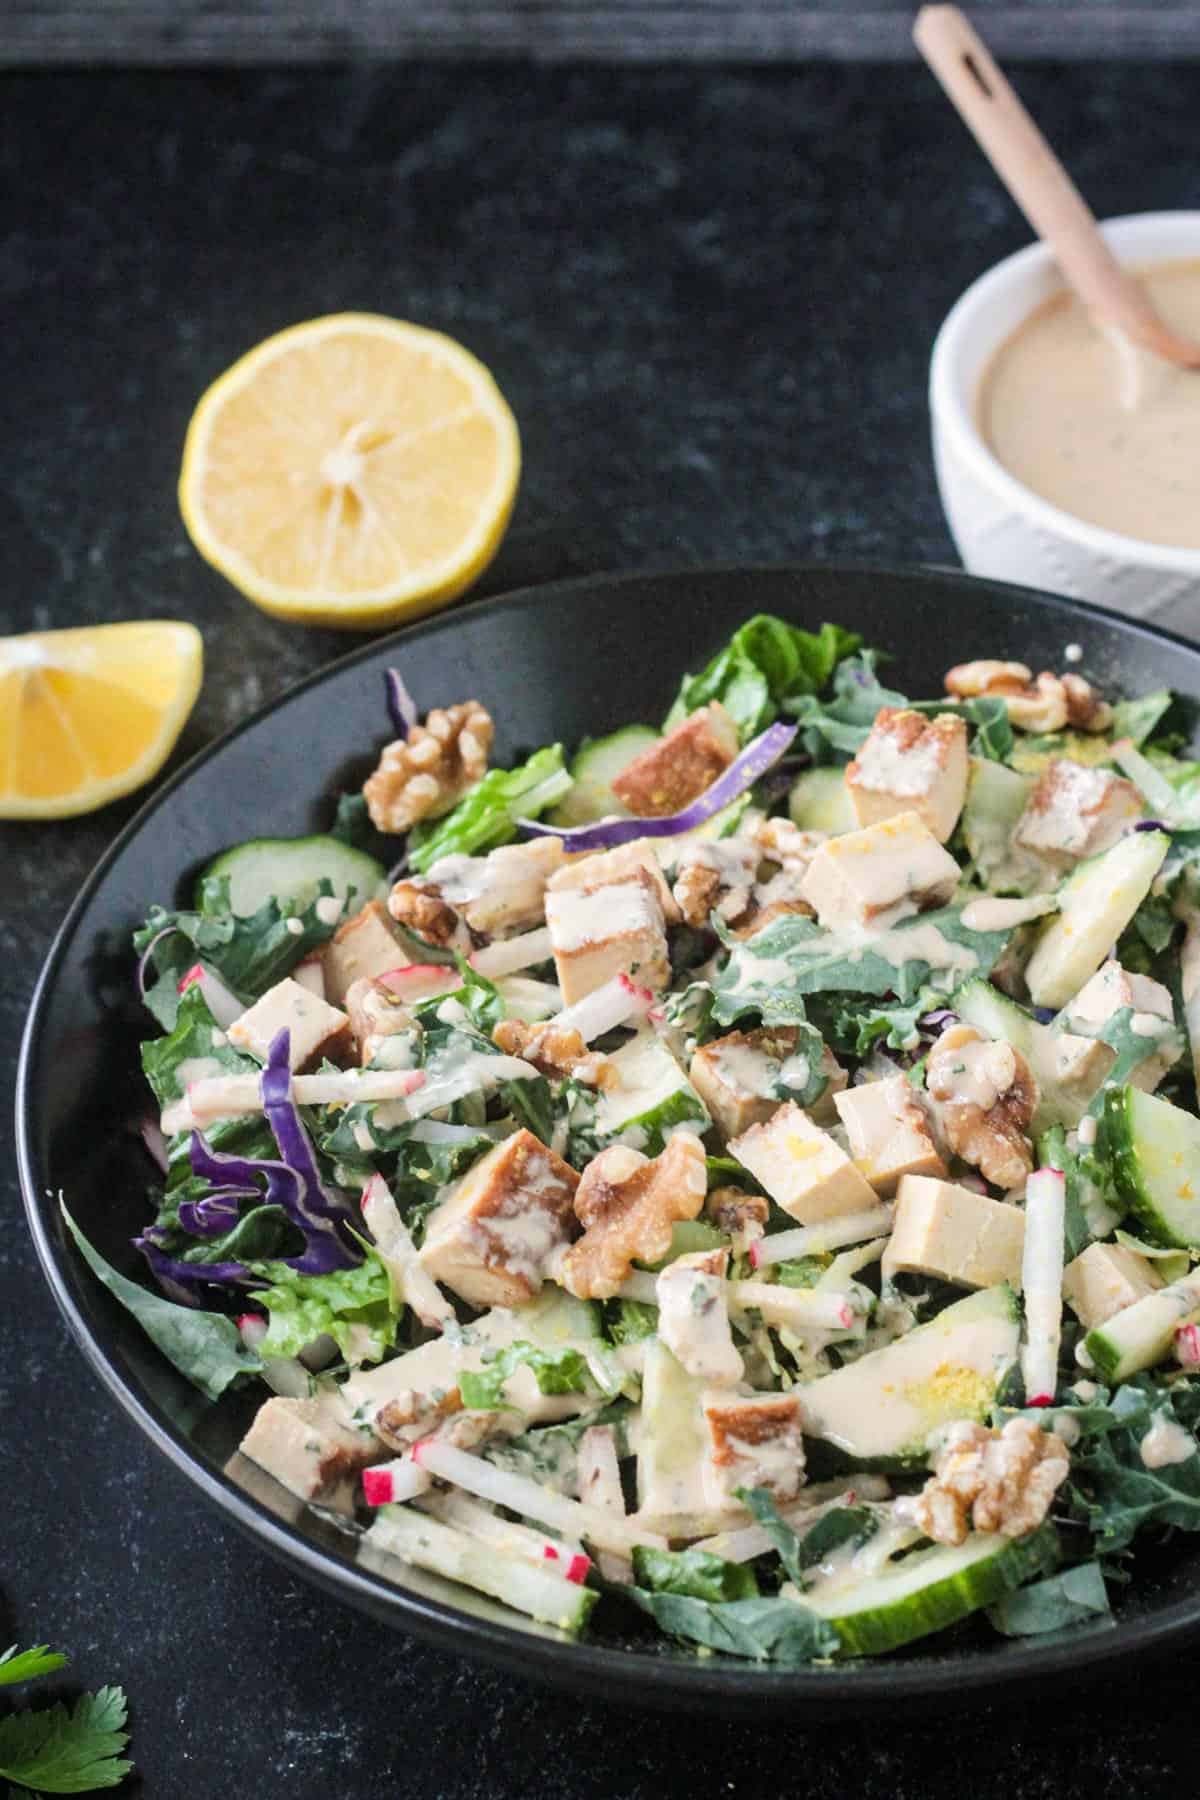 Tahini dressing drizzled over the top of a salad.